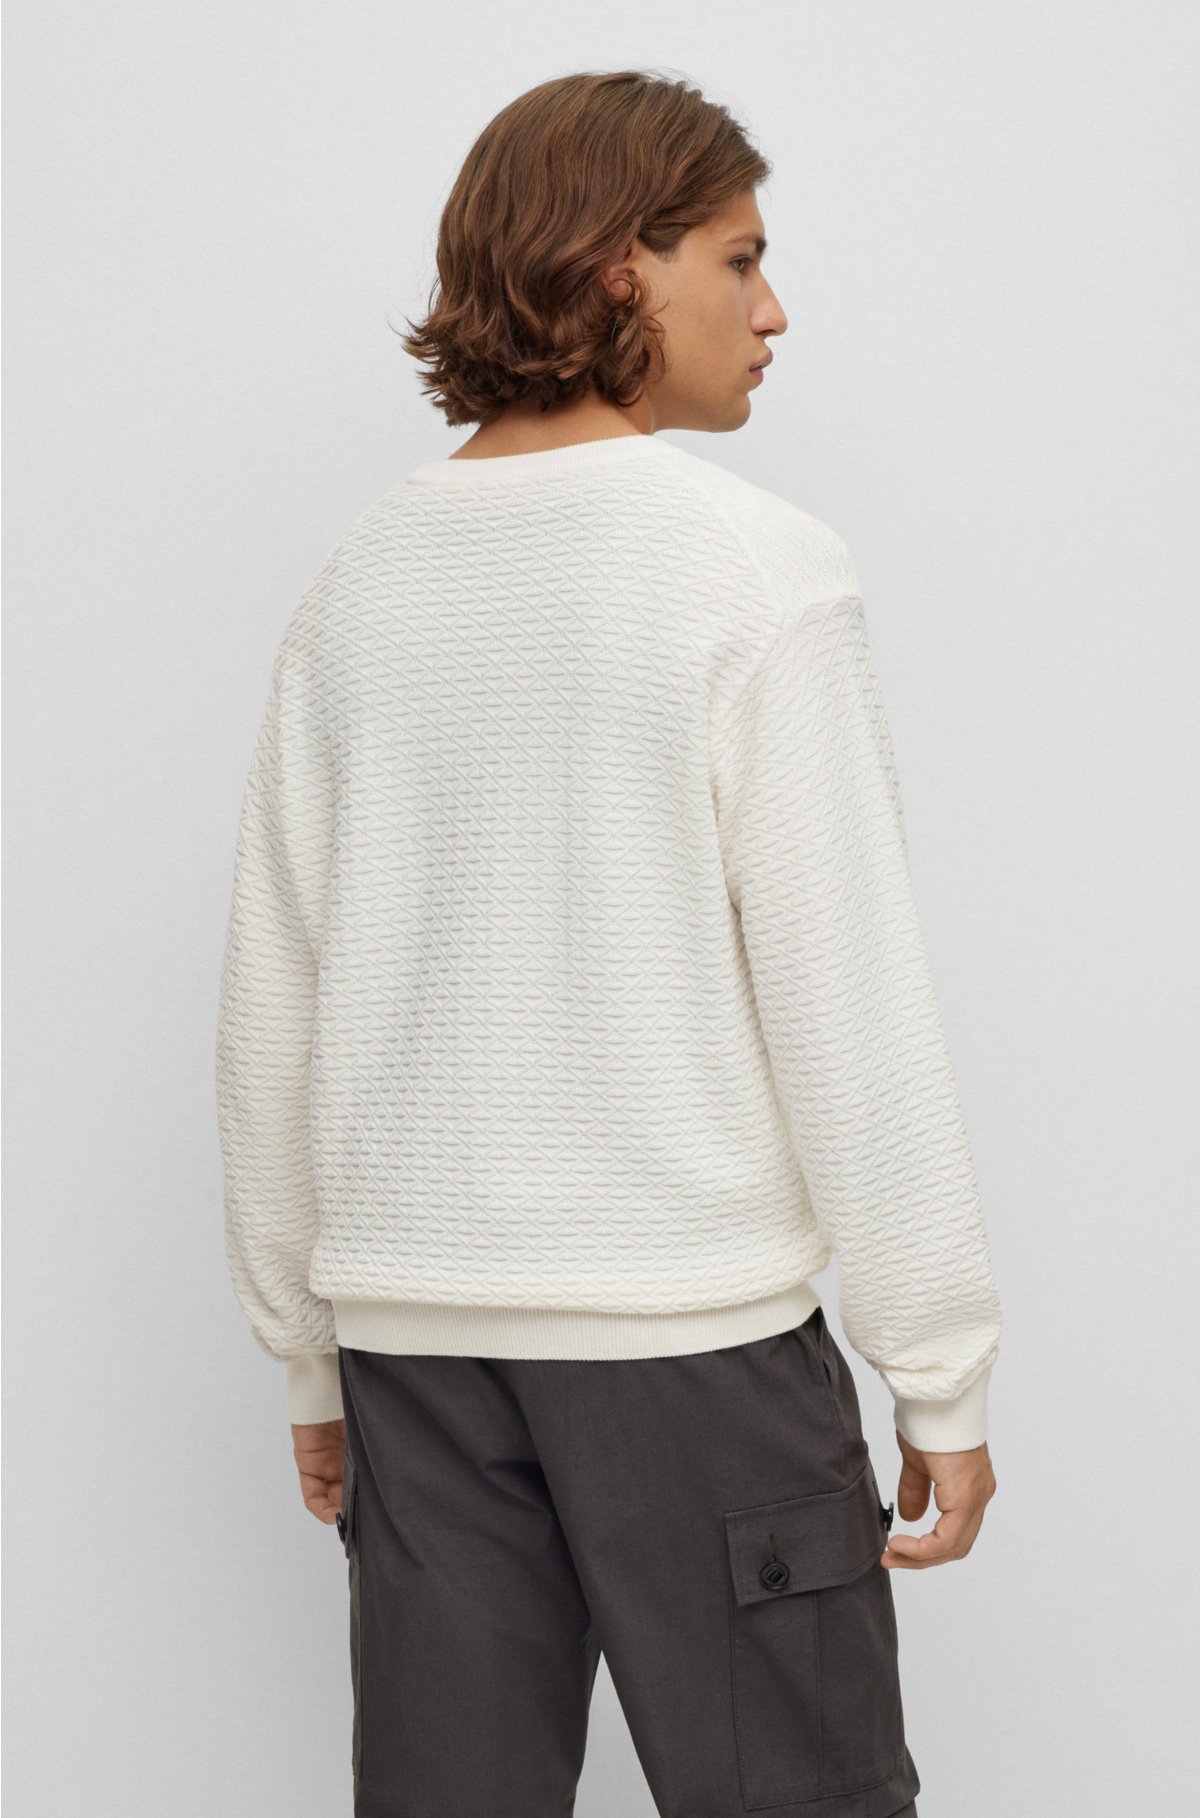 Relaxed-fit sweater in cotton with knitted structure, White